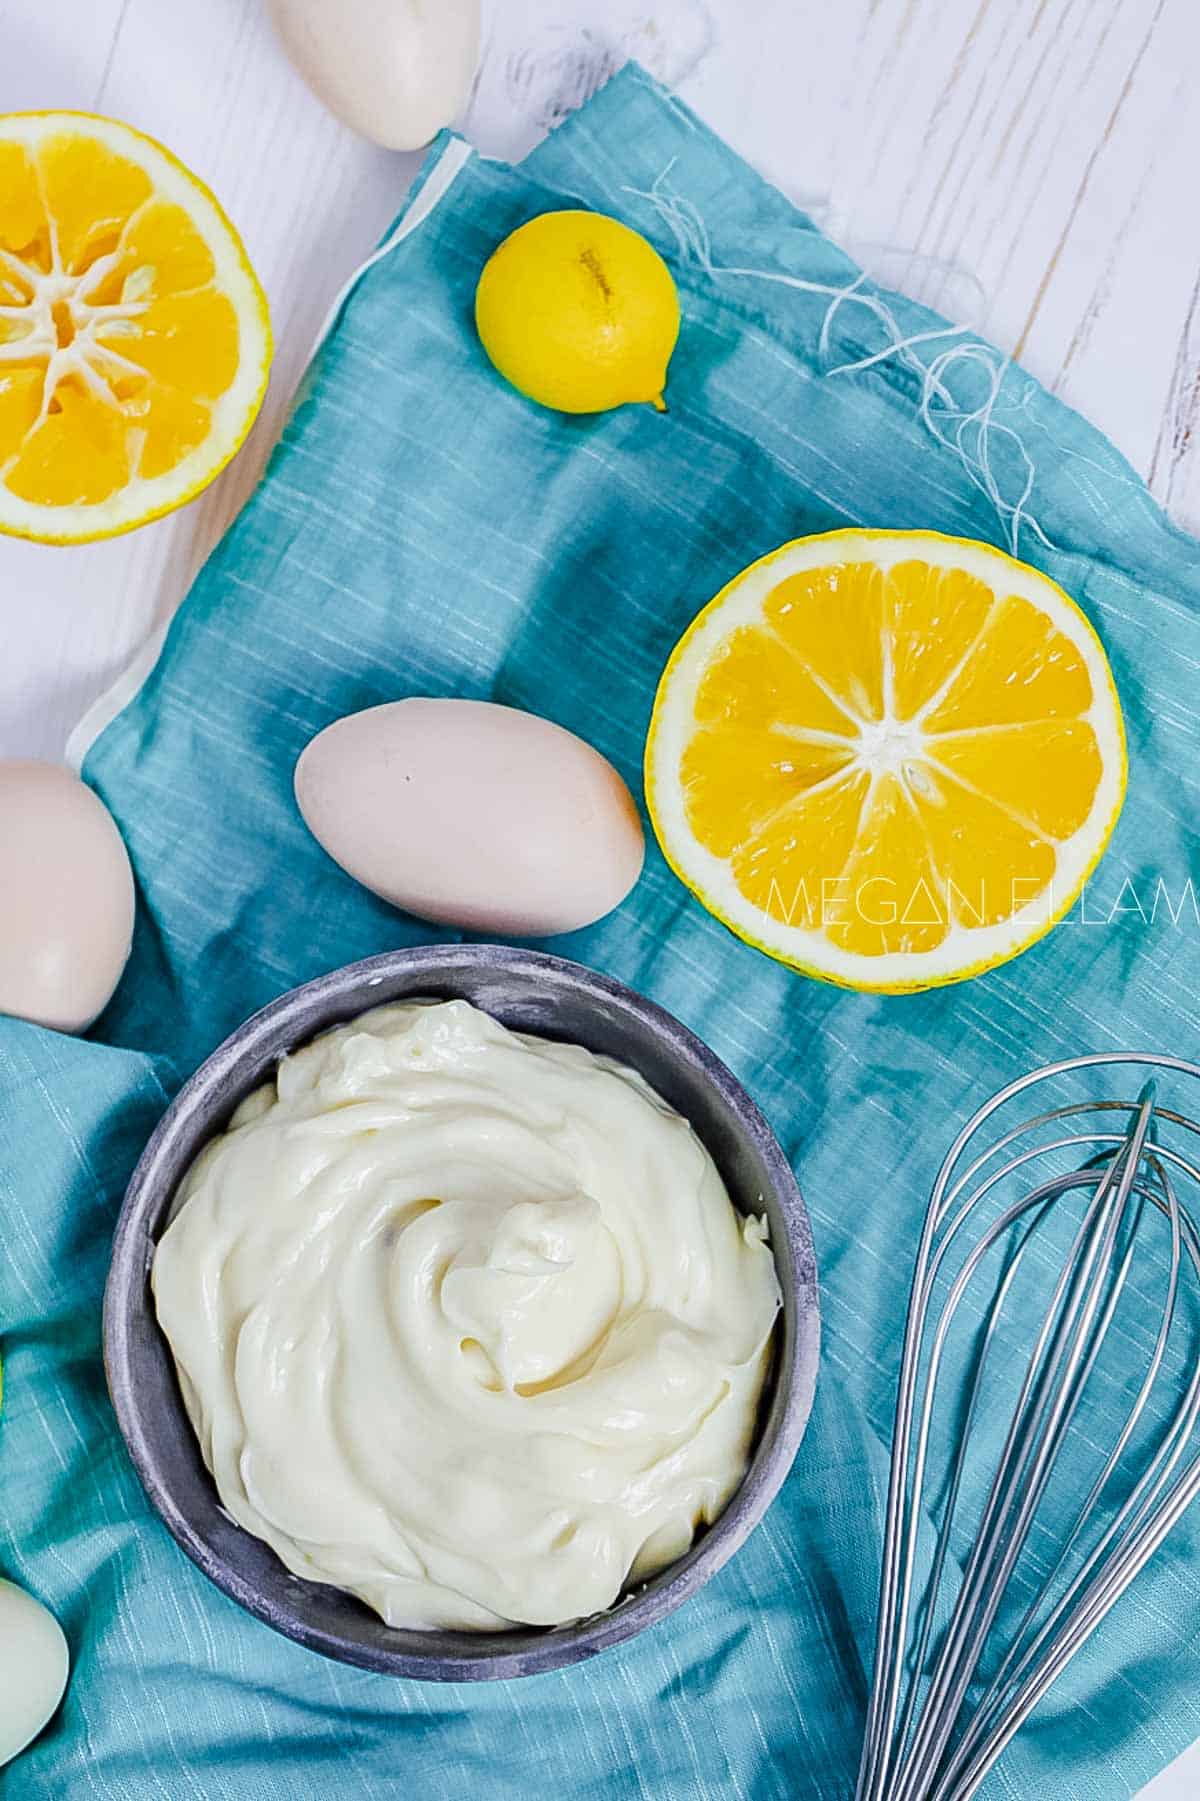 A grey bowl with mayo in it on a piece of blue fabric with eggs and lemons too.